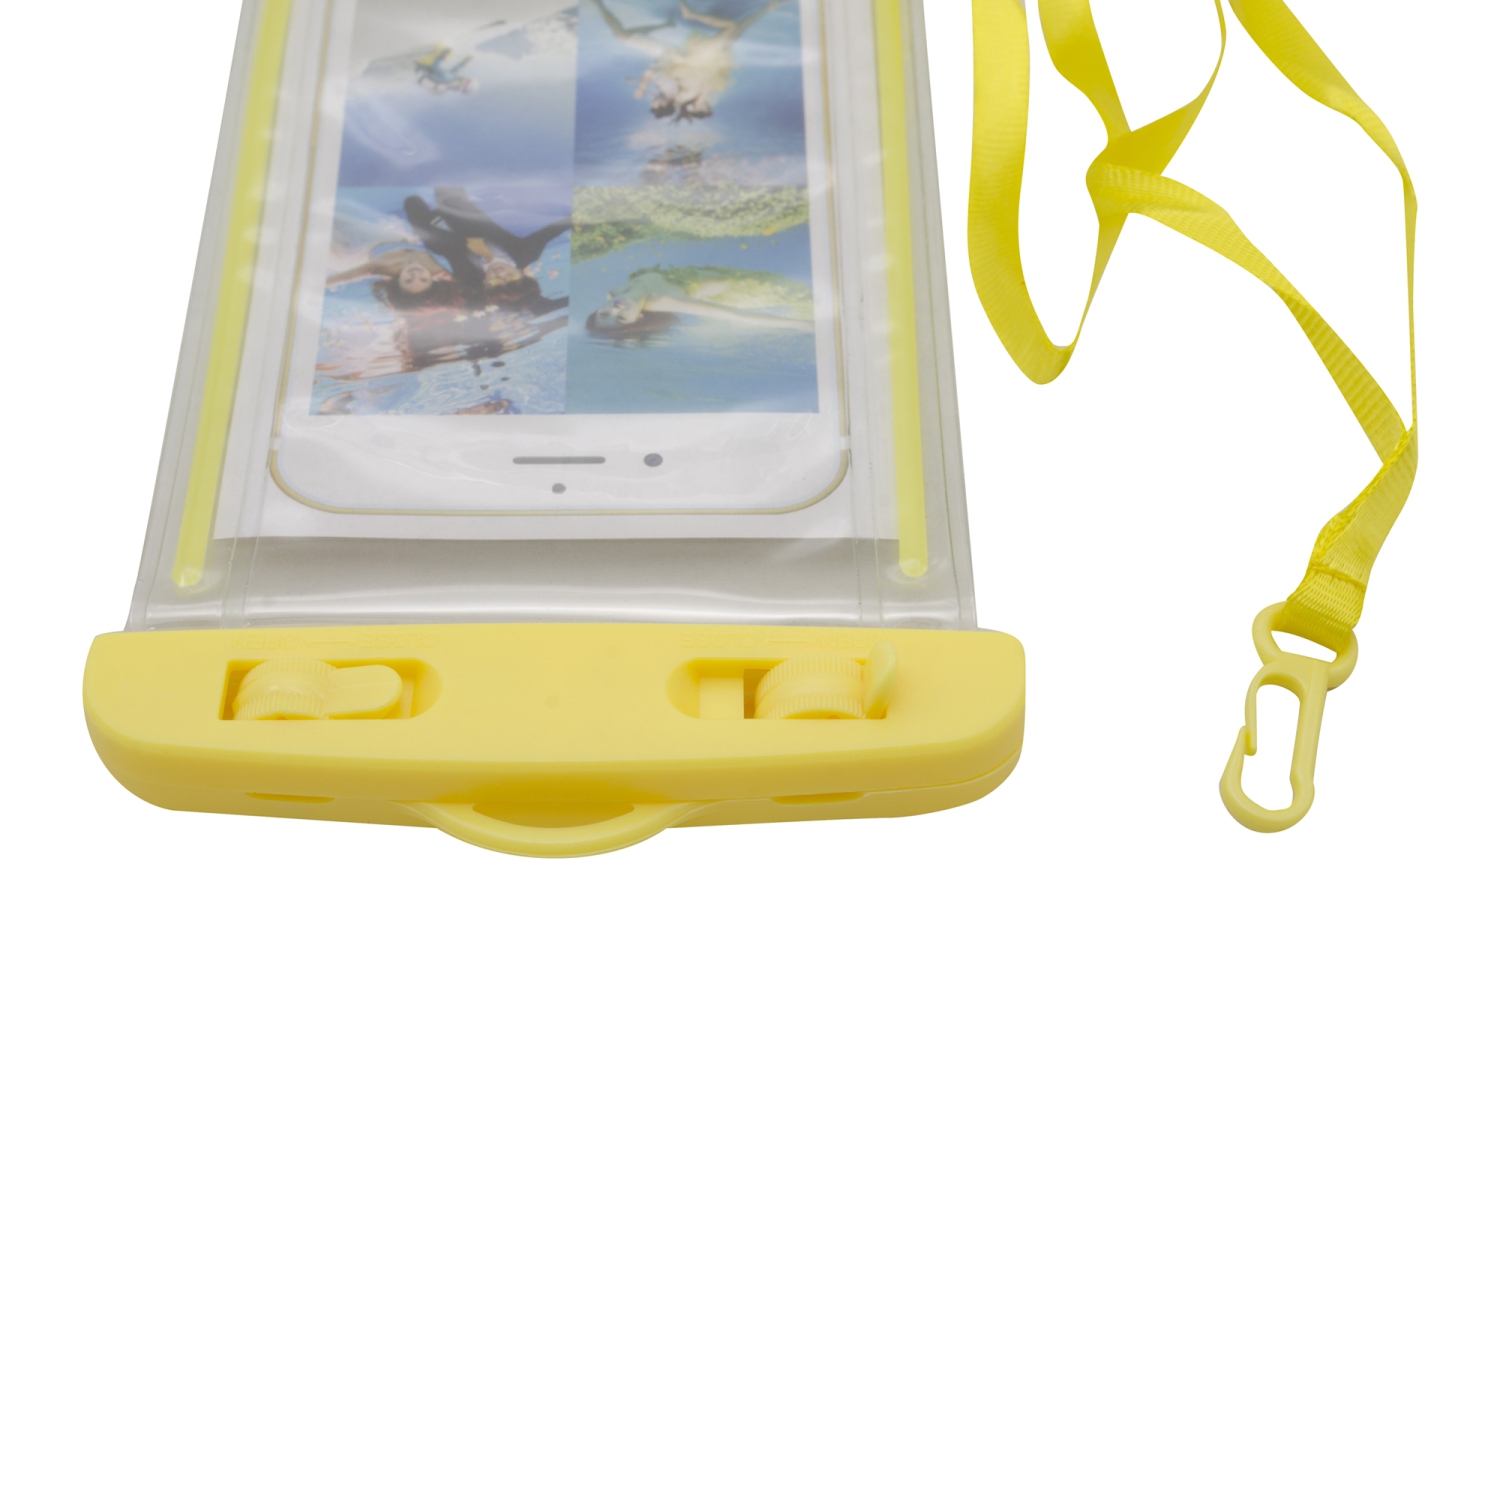 Universal Waterproof Underwater Pouch Dry Bag Case Cover Cell Phone Swimming Bag Fits Most Mobile Phones - Yellow